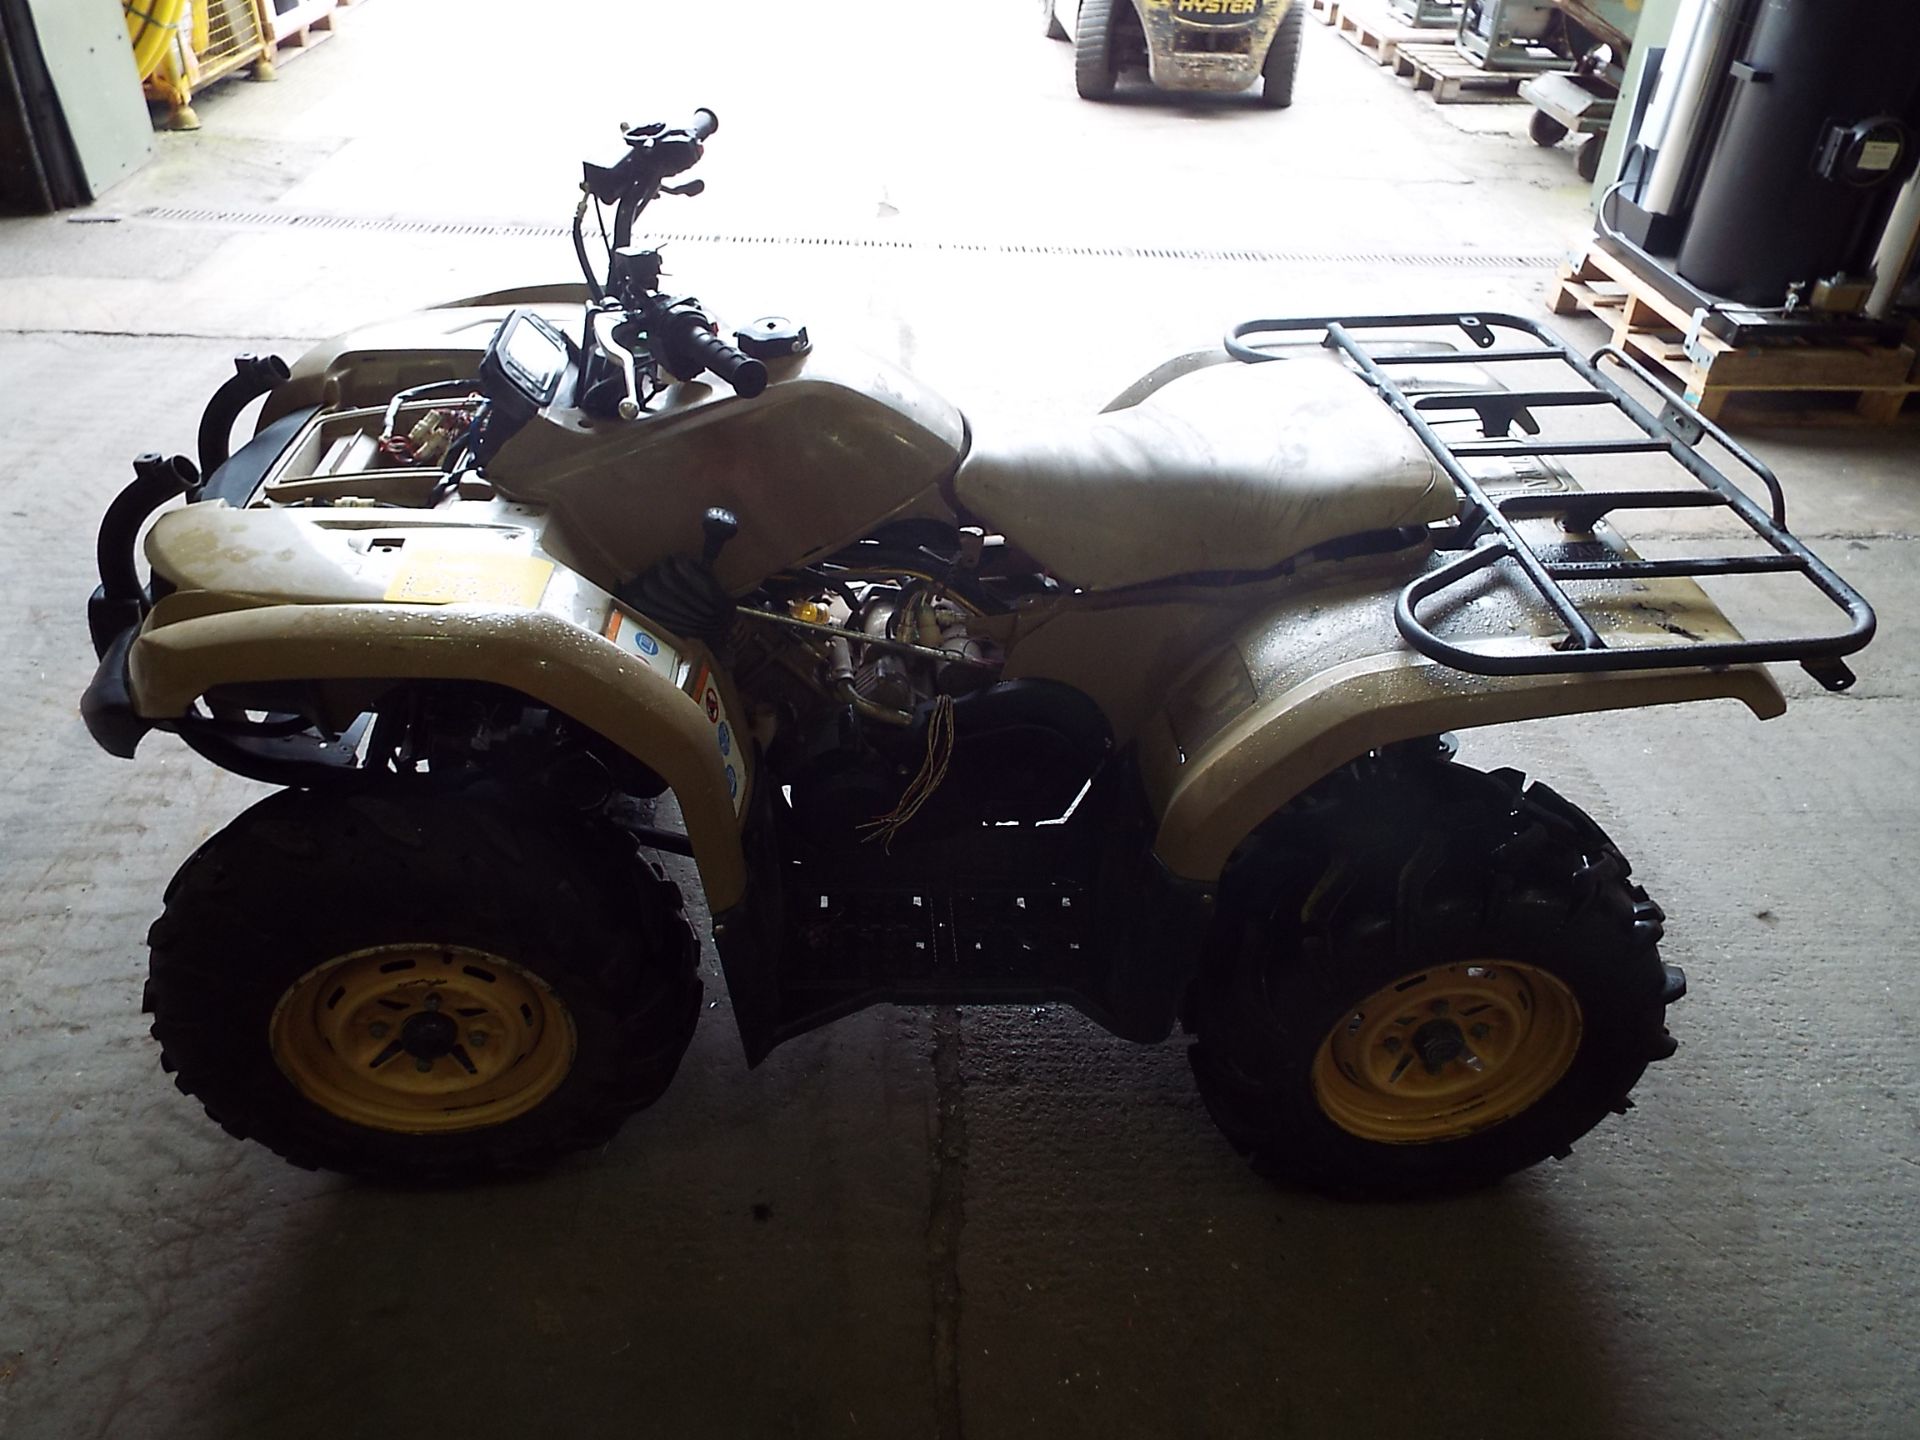 Military Specification Yamaha Grizzly 450 4 x 4 ATV Quad Bike - Image 13 of 19